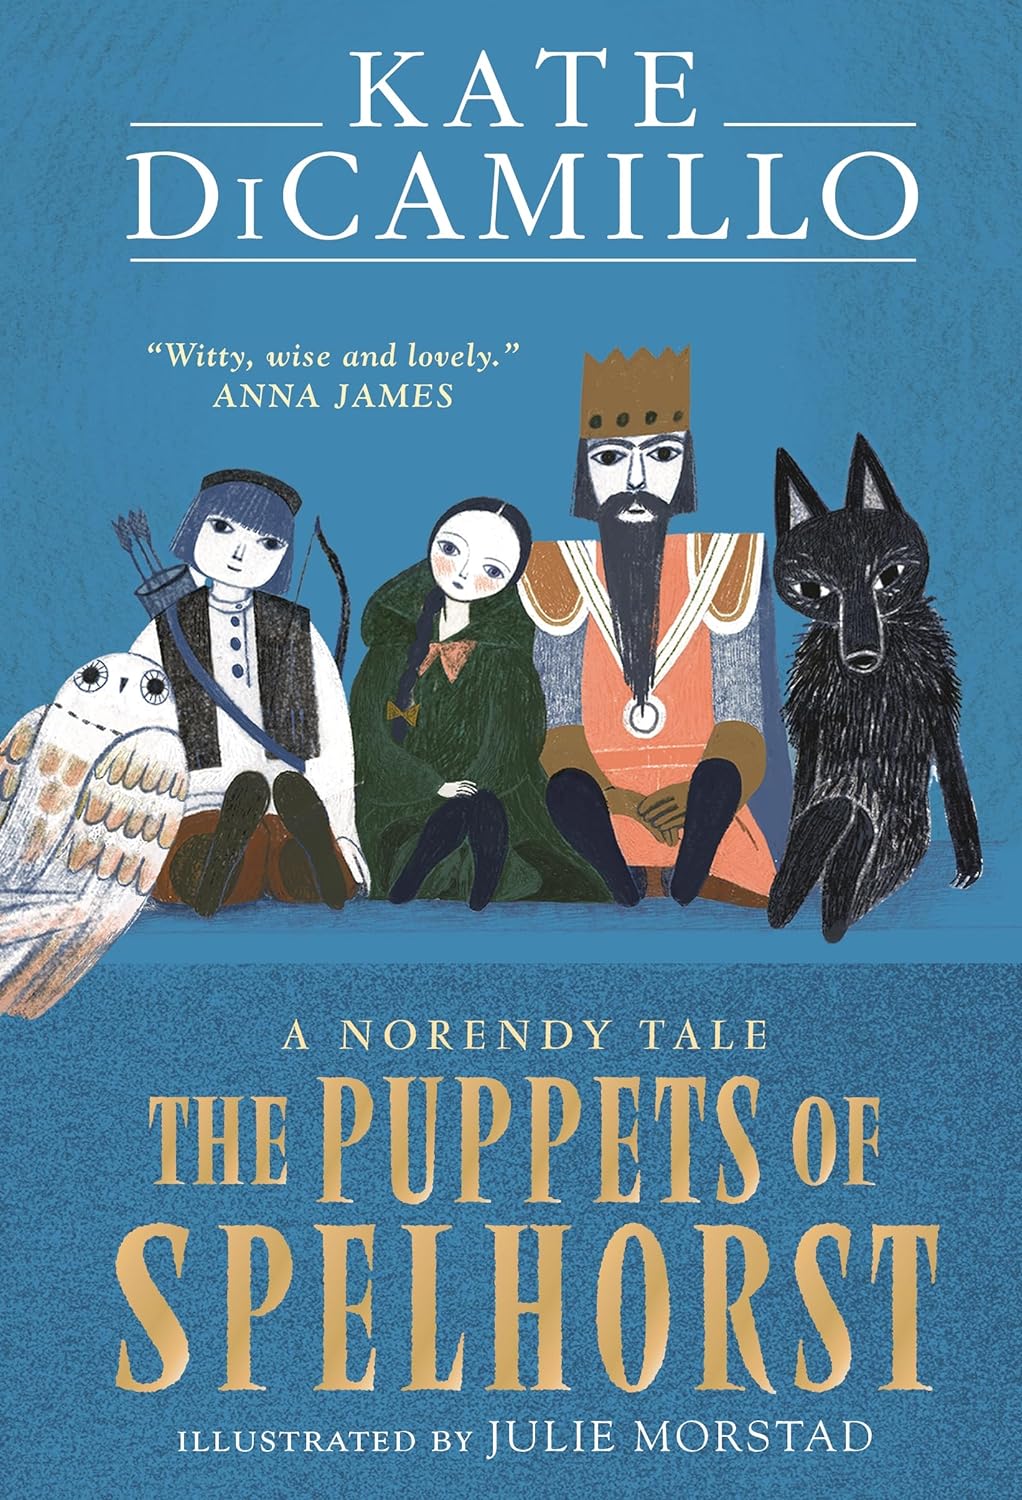 Kate DiCamillo: The Puppets of Spelhorst, illustrated by Julie Morstad